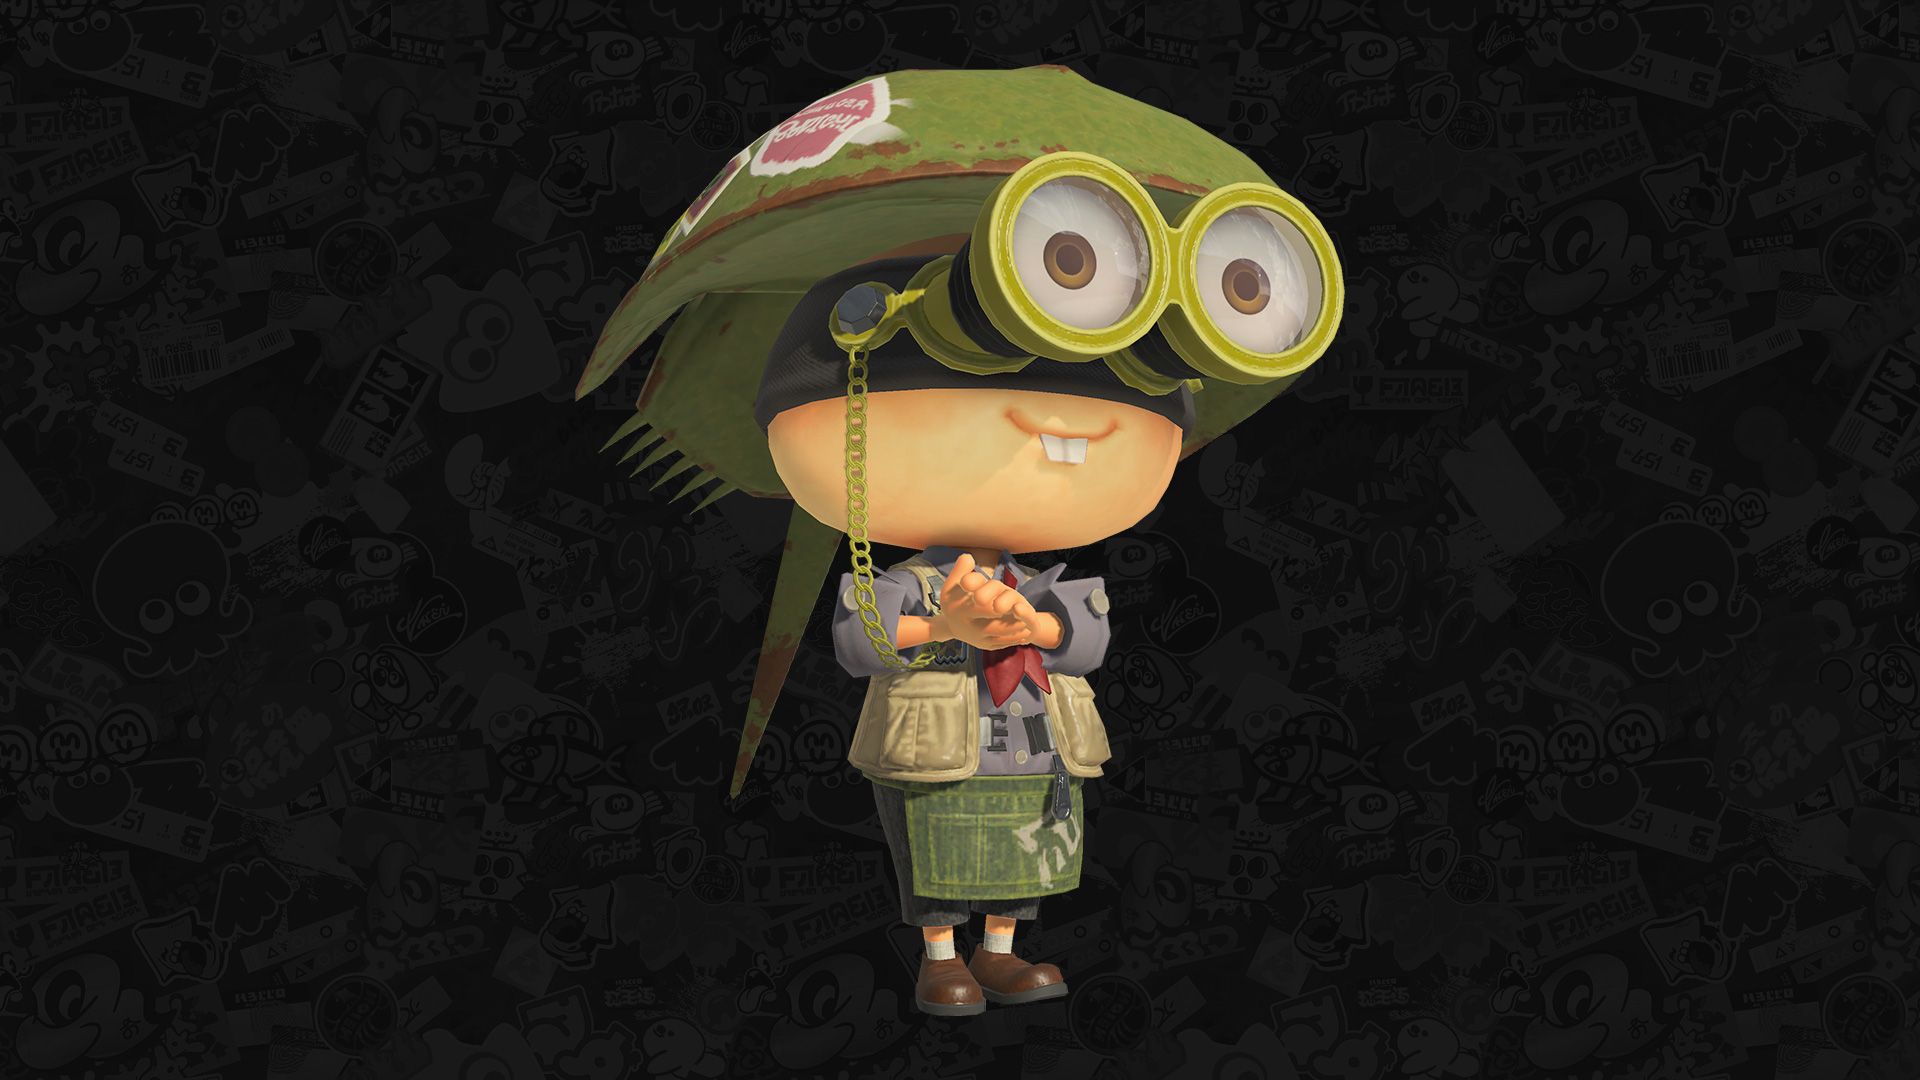 What's everyone think of the new Tournament Manager? : r/splatoon